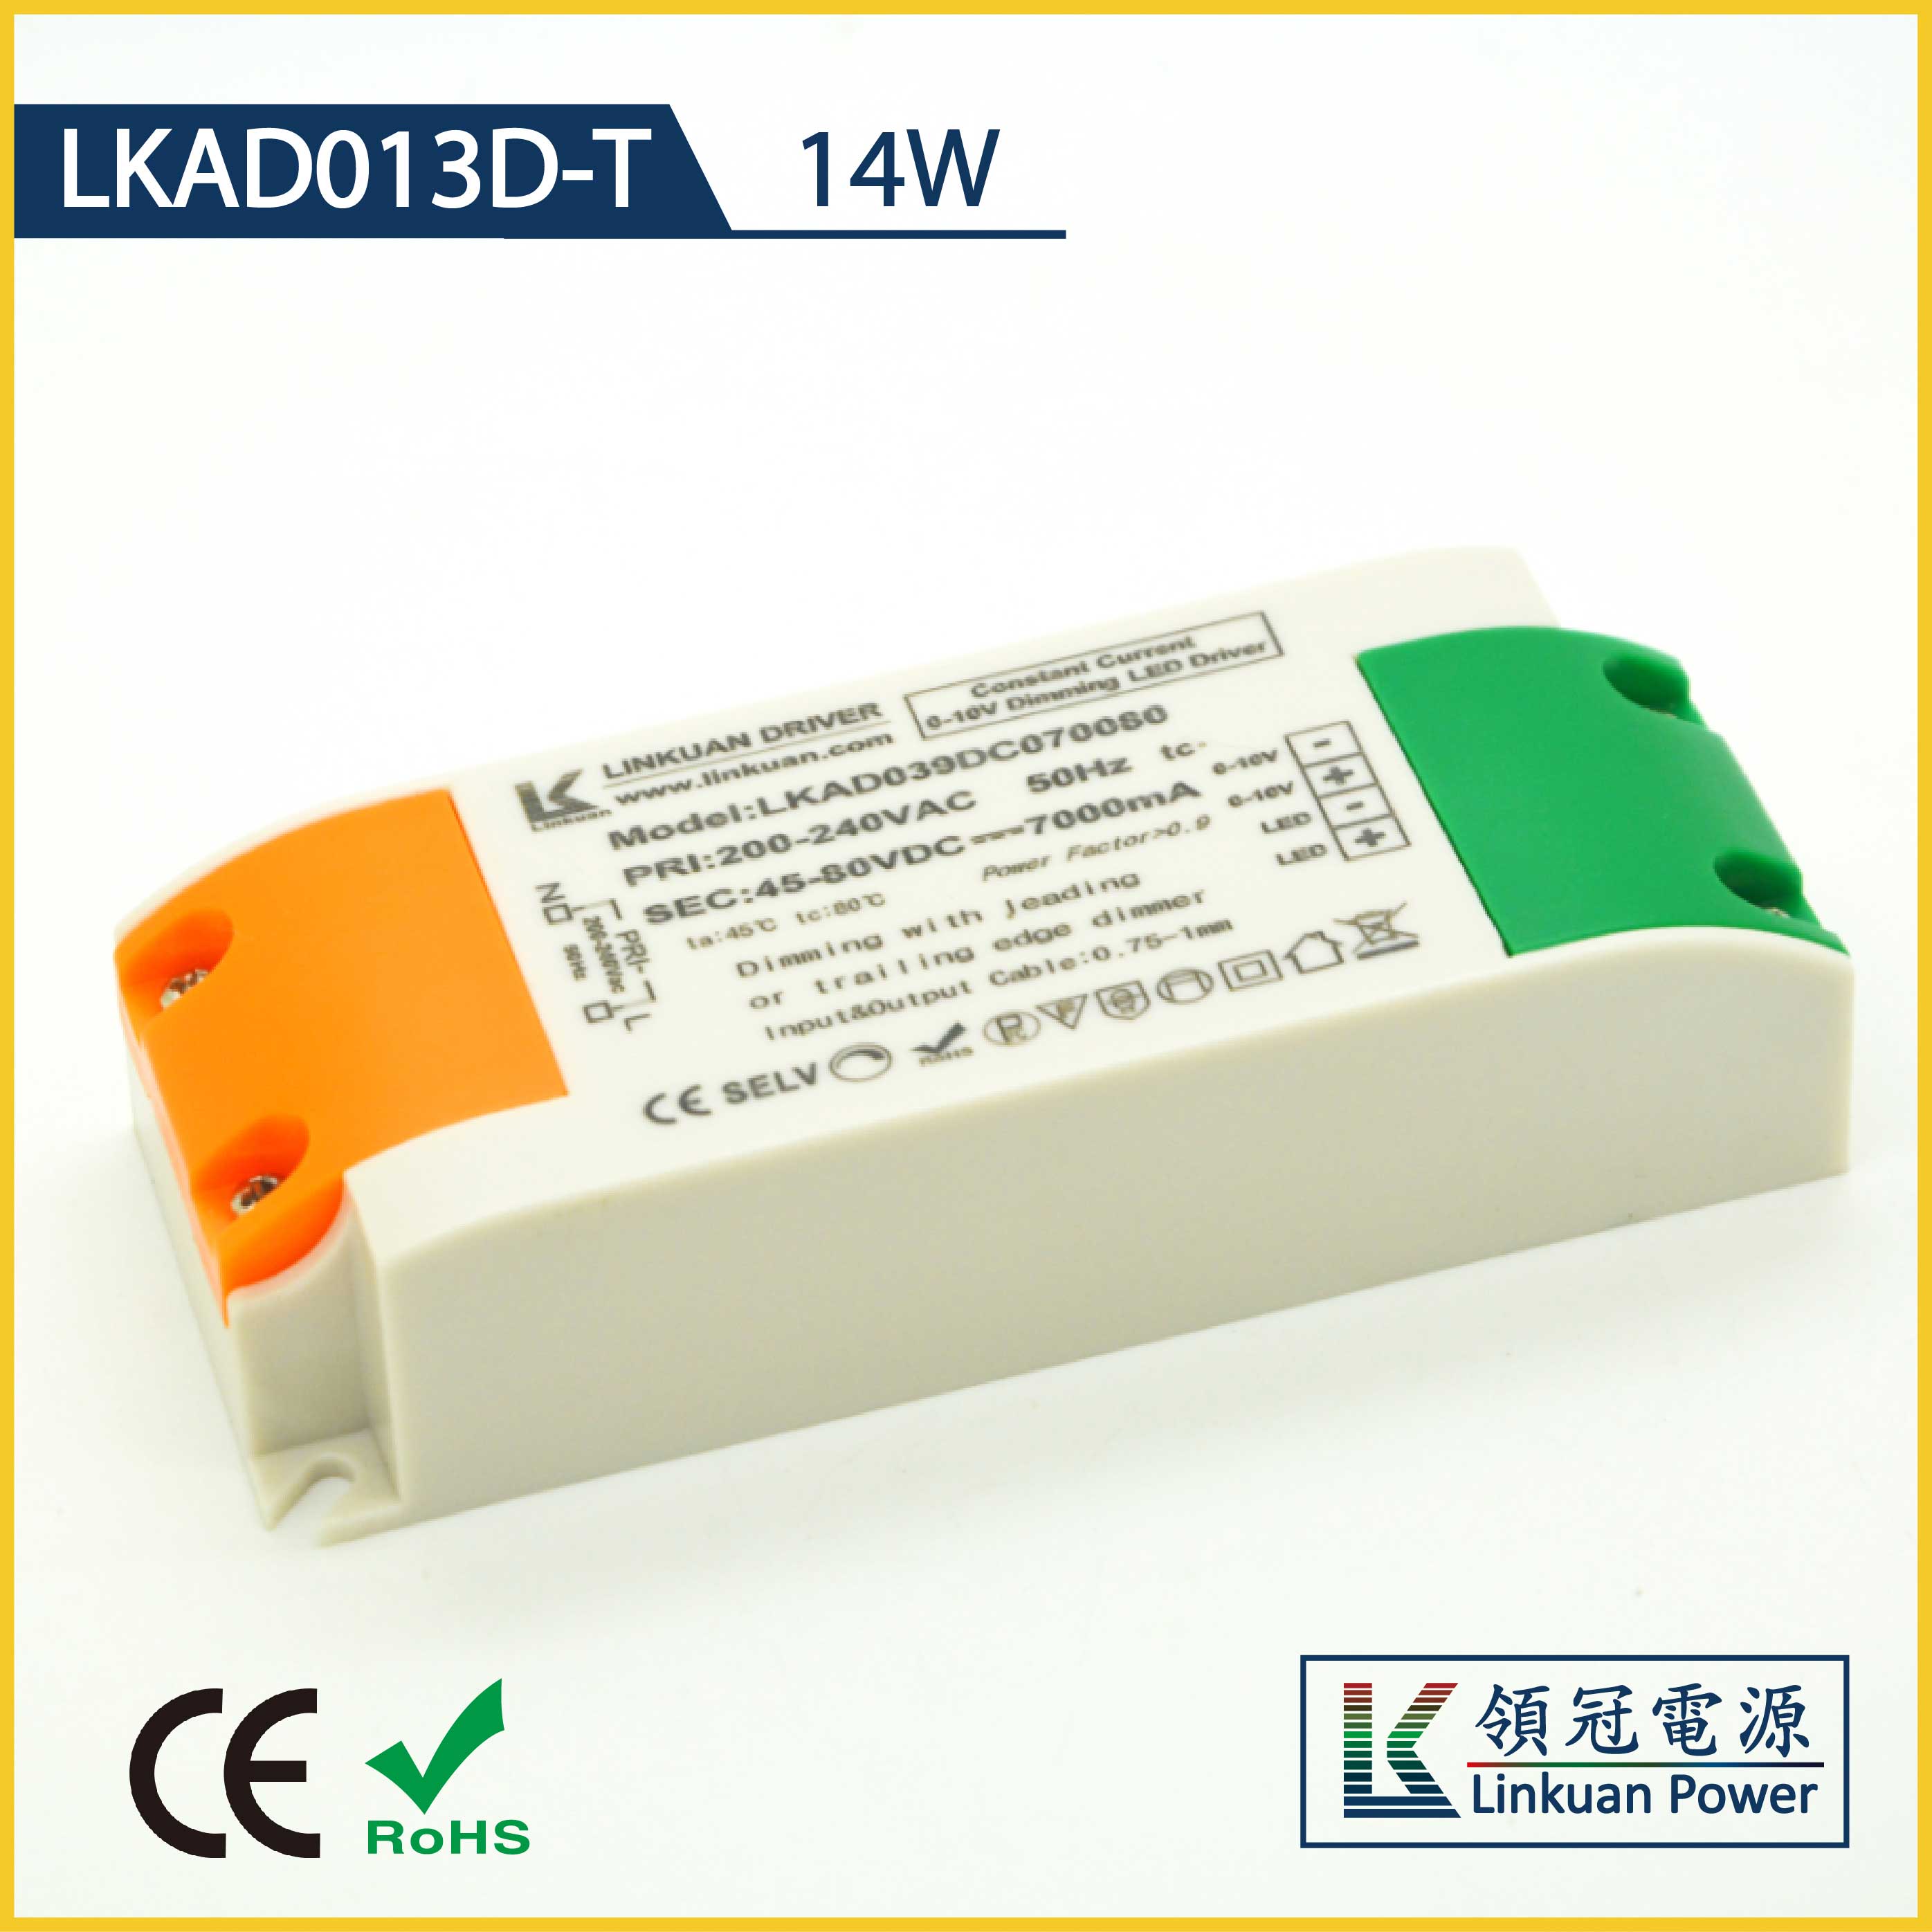 LKAD013D-T 14W 10-42V 350mA triac dimmable led driver with DIP switch